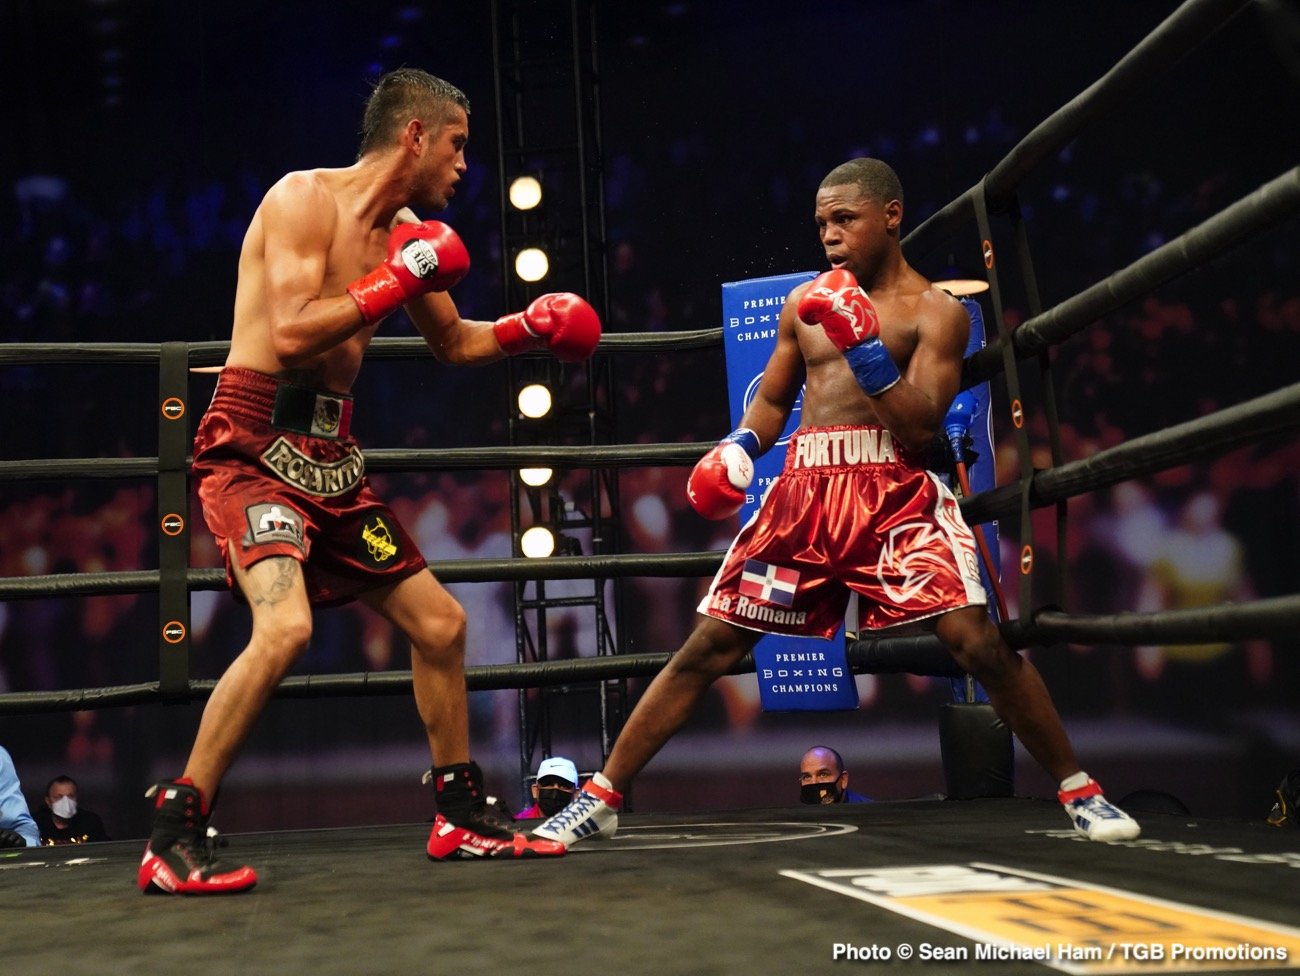 Image: Ryan Garcia vs. Devin Haney before the end of 2021?